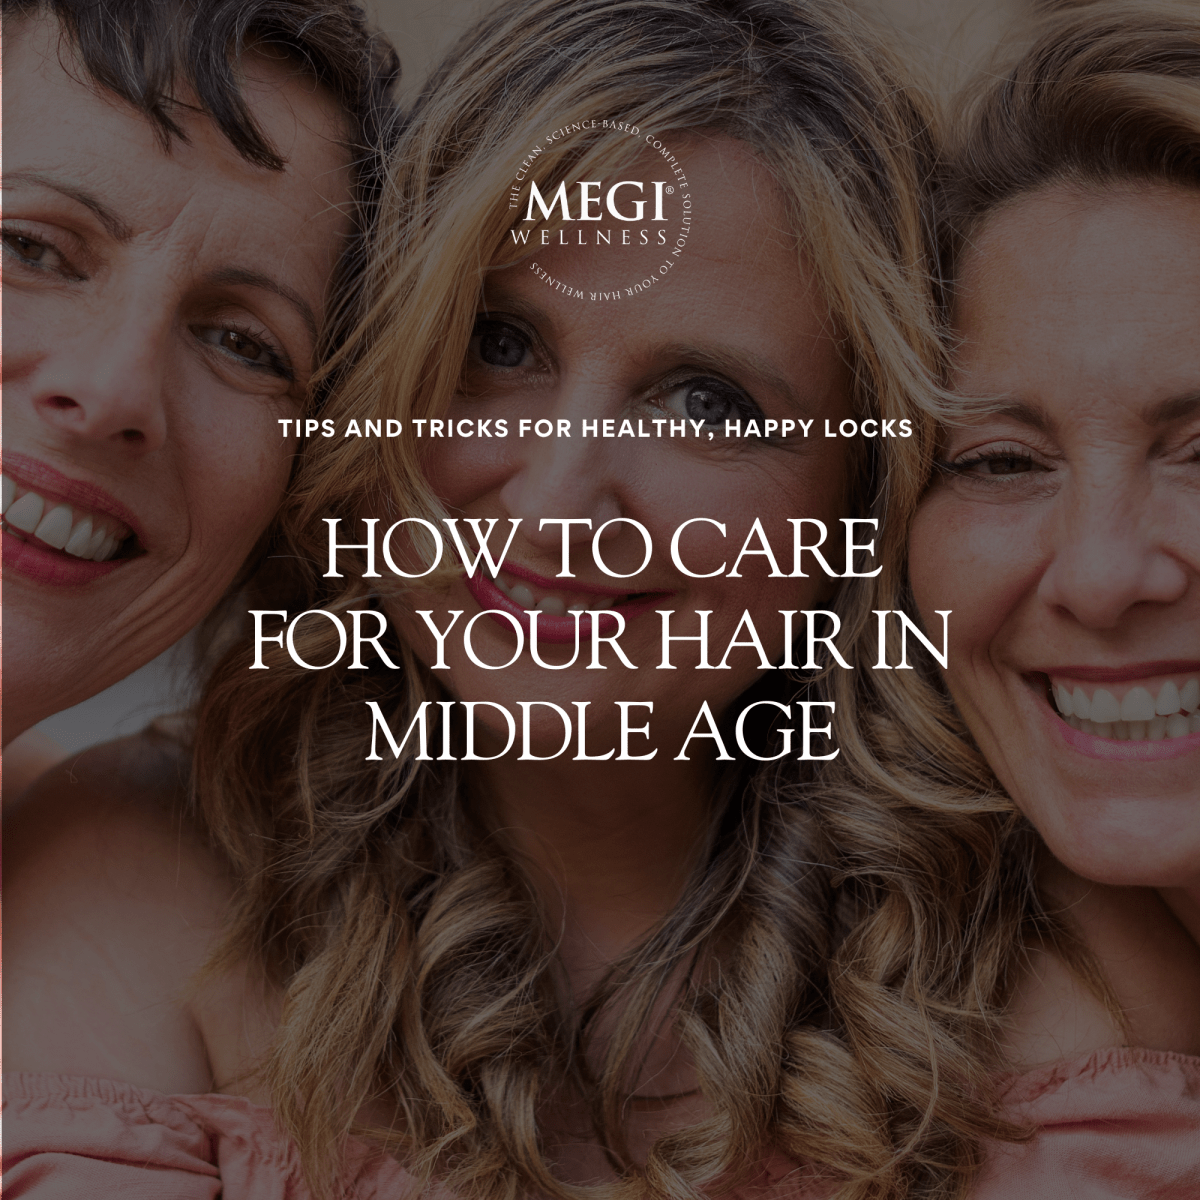 How to Care for Your Hair in Middle Age: Tips and Tricks for Healthy, Happy Locks - MEGIWellness